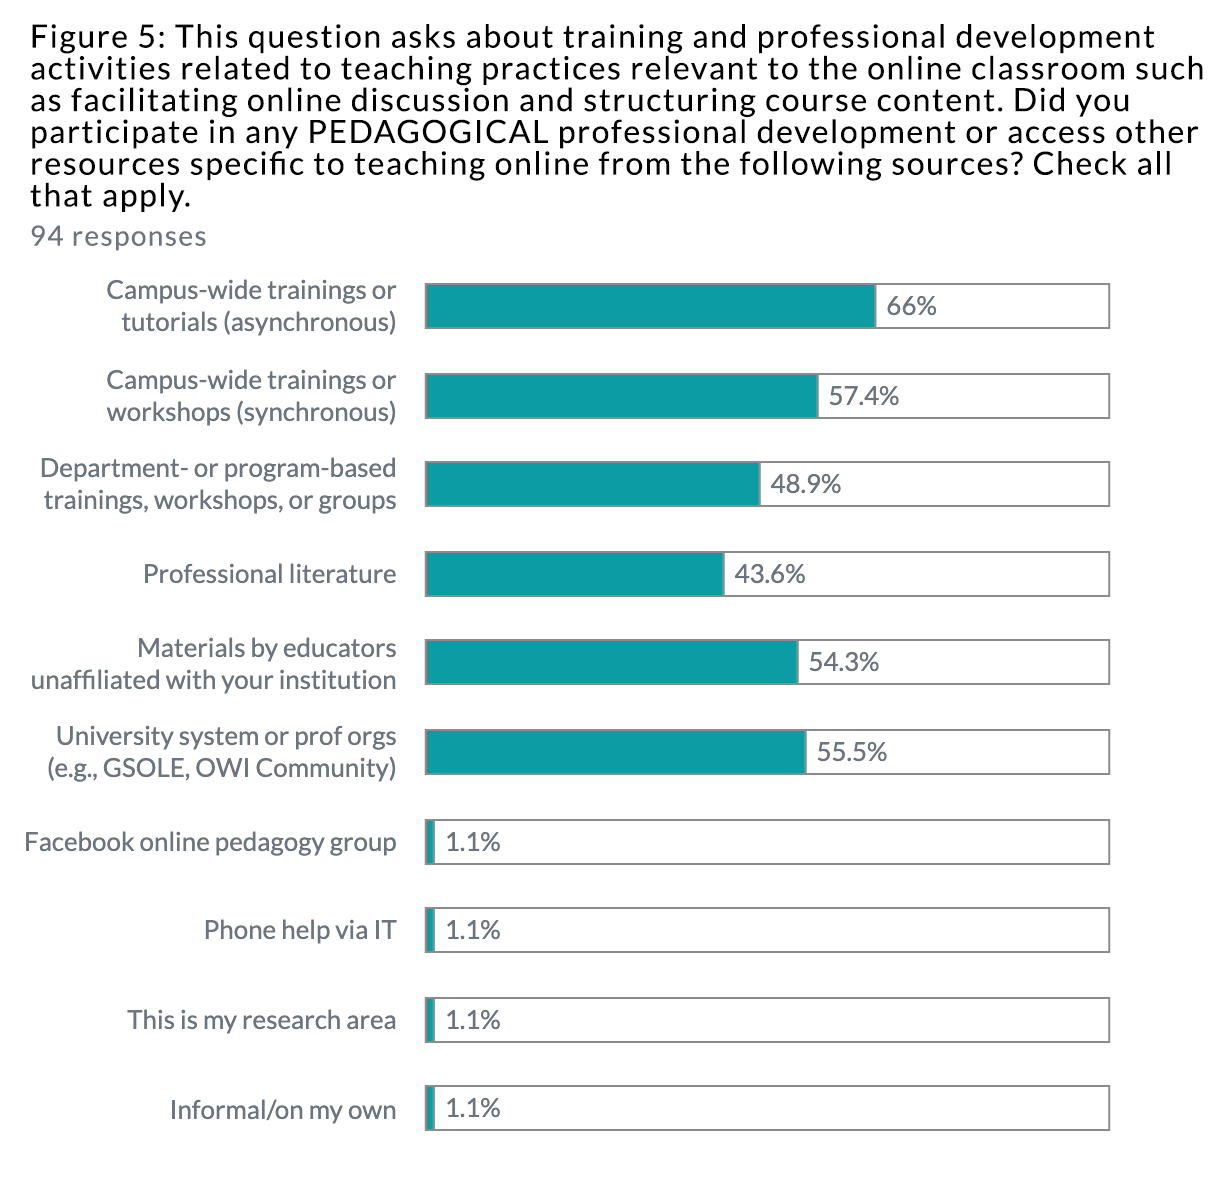 bar graph reporting whether survey respondents completed any training, professional development, or certification to teach online prior to academic year 2020-2021: of 96 responses, 73.8% said yes, 22.9% said no, and 3.3% said other